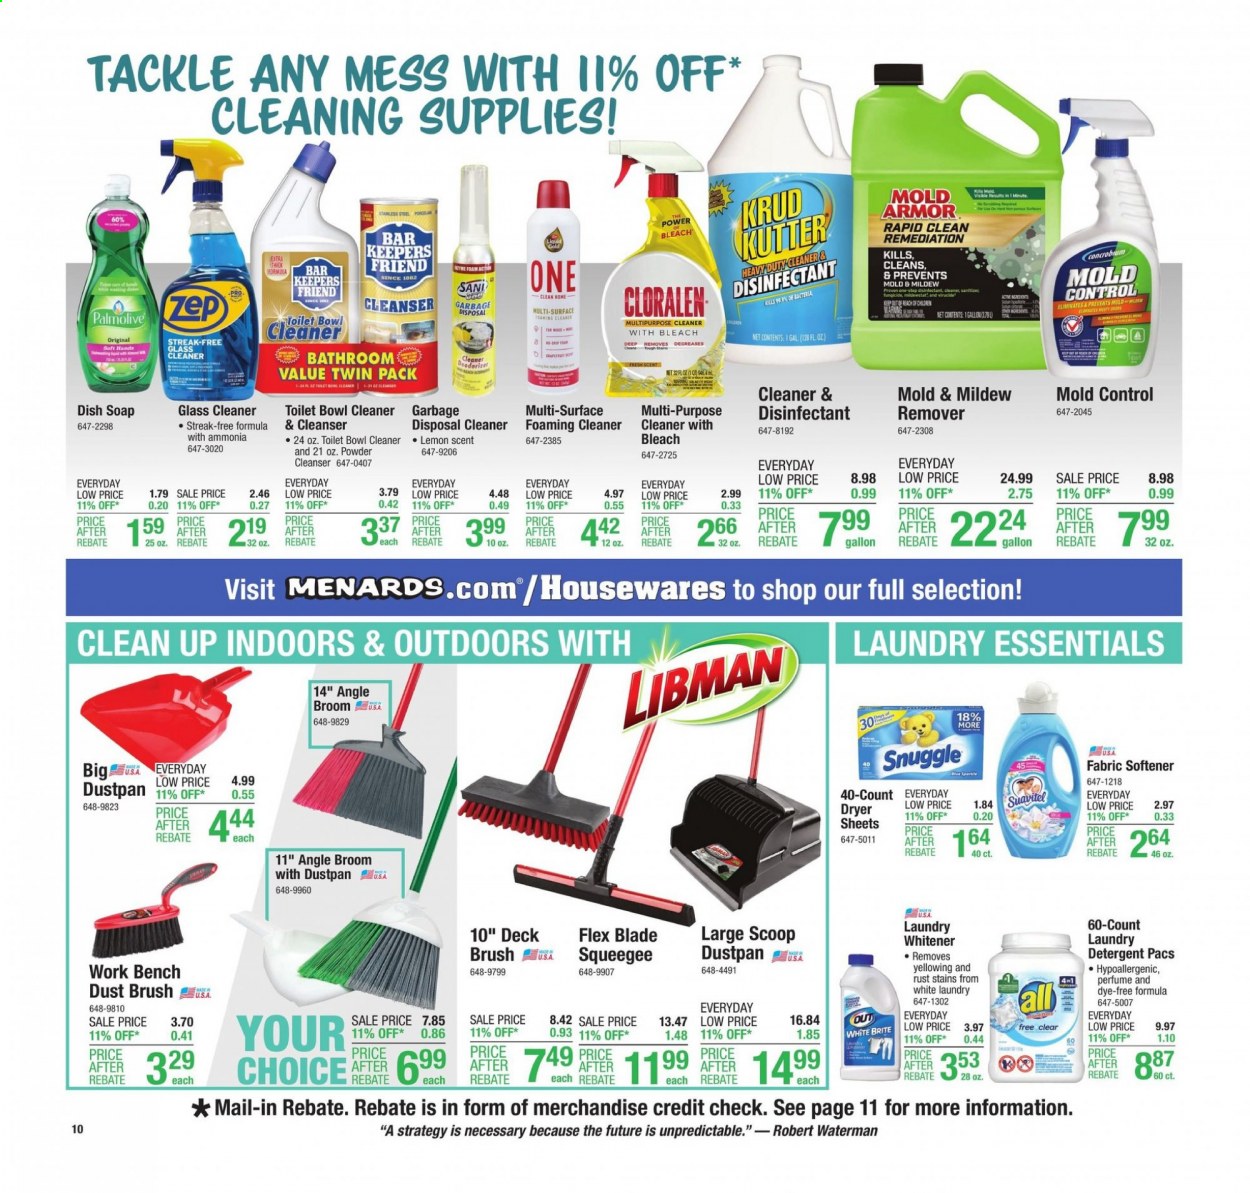 thumbnail - Menards Flyer - 05/06/2021 - 05/15/2021 - Sales products - toilet, detergent, cleaner, bleach, desinfection, glass cleaner, toilet bowl, Snuggle, fabric softener, laundry detergent, dryer sheets, brush, broom, angle broom, work bench, gallon. Page 14.